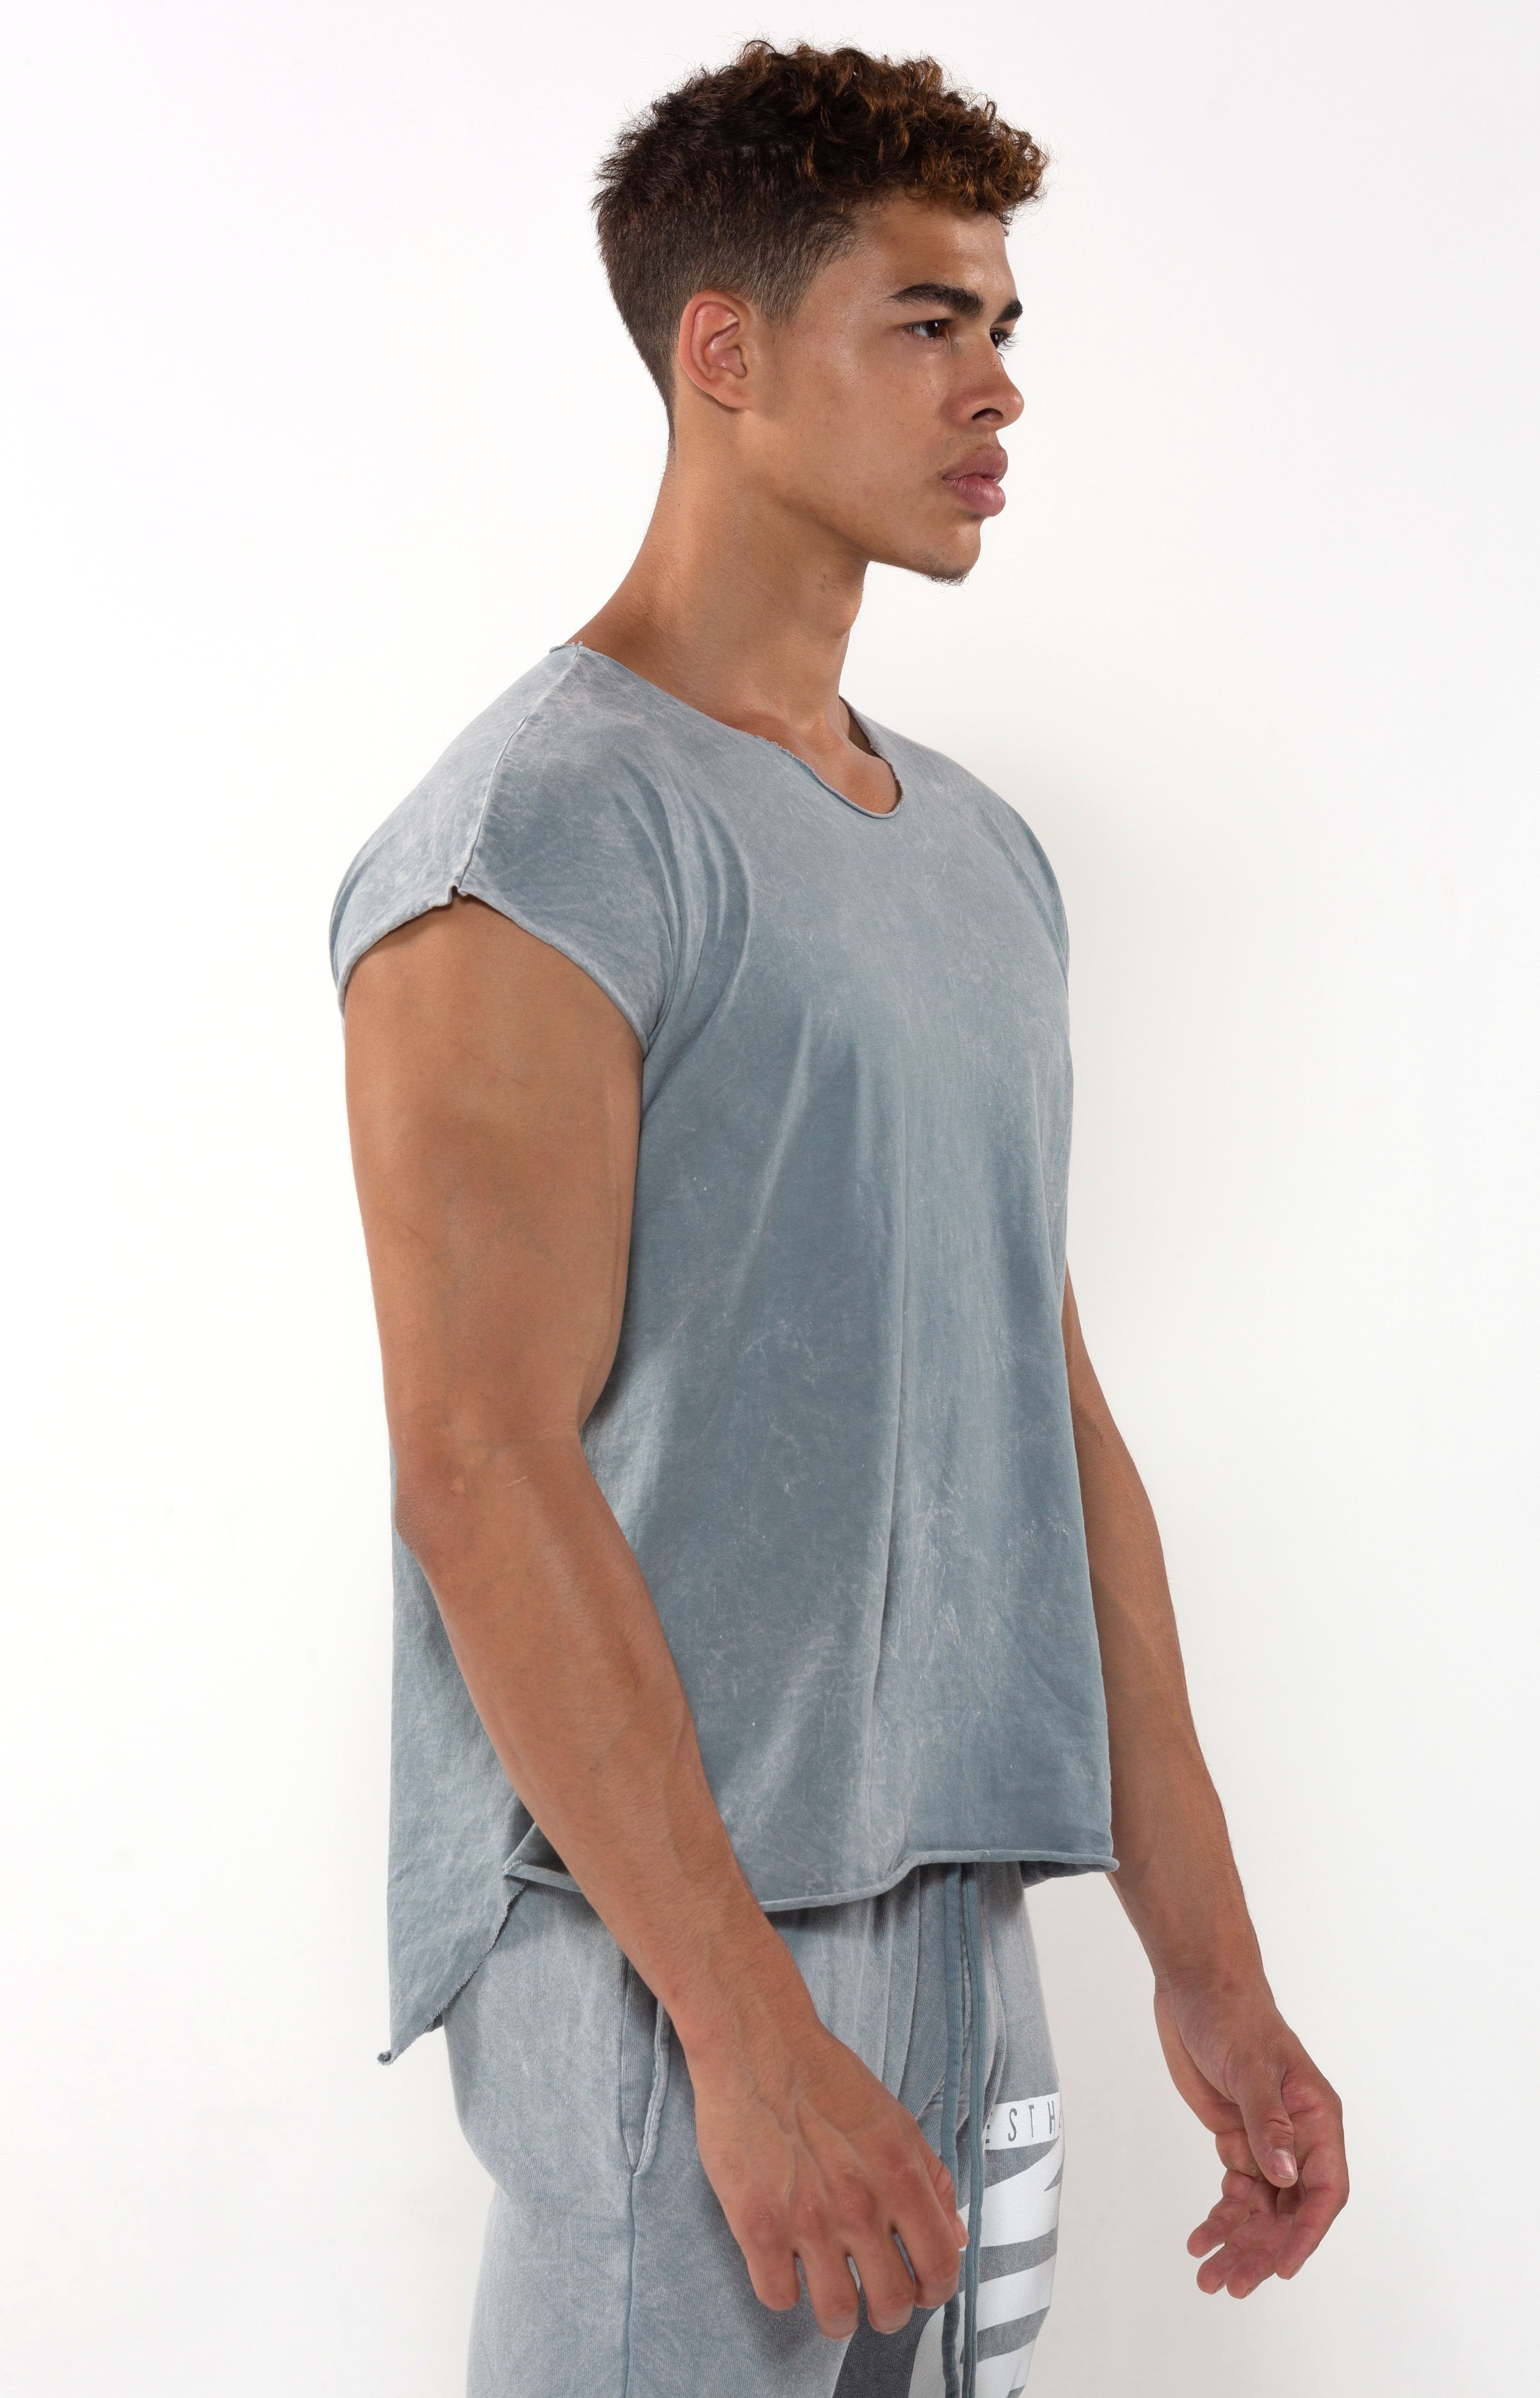 Capped Sleeve Vintage Cool Grey T - Golden Aesthetics